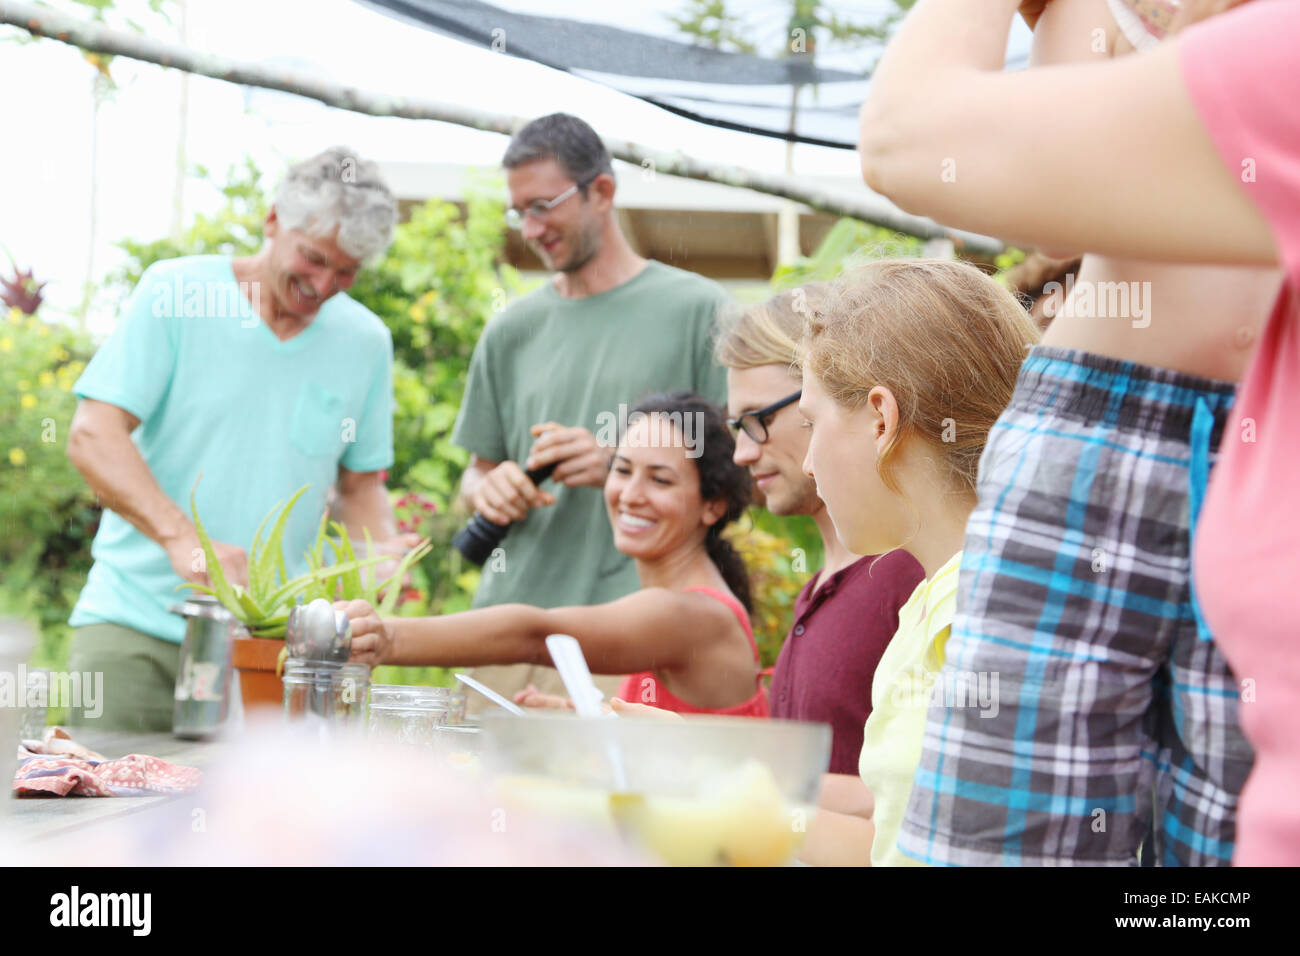 Men and women at table in garden Stock Photo